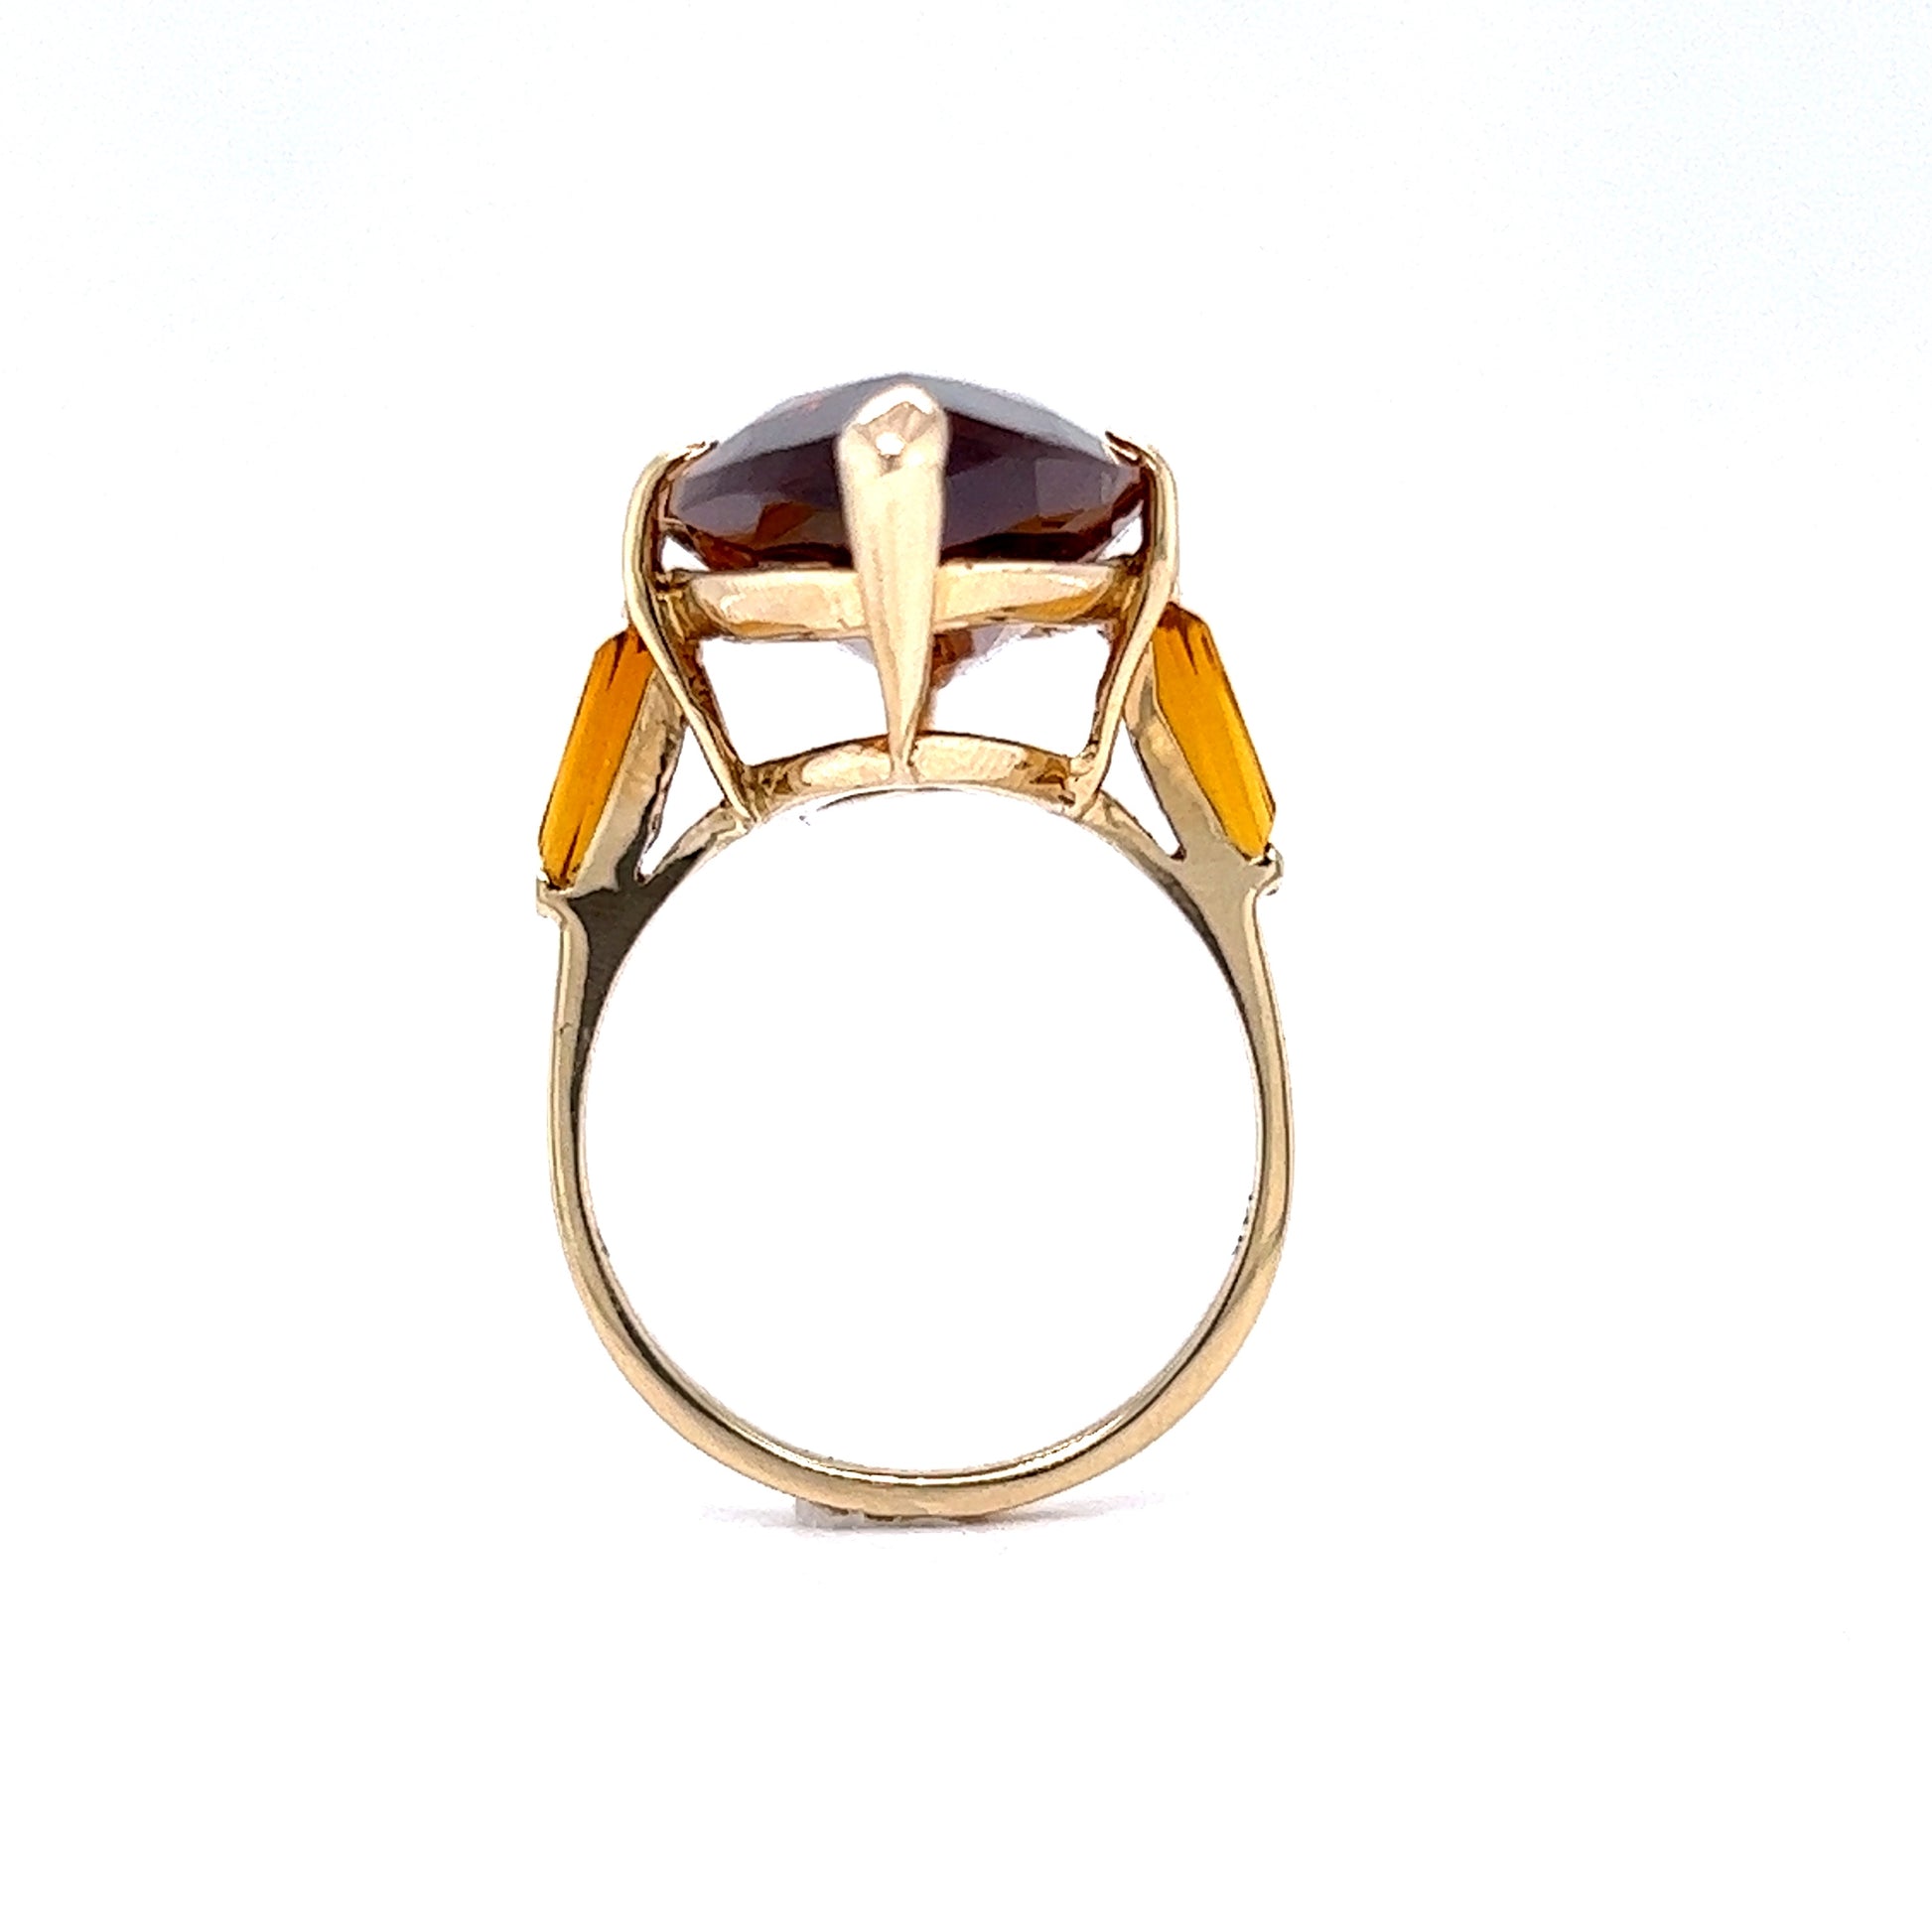 Marquise Cut Citrine Cocktail Ring in 14k Yellow GoldComposition: 14 Karat Yellow GoldRing Size: 8.5Total Gram Weight: 9.72 gInscription: 14k